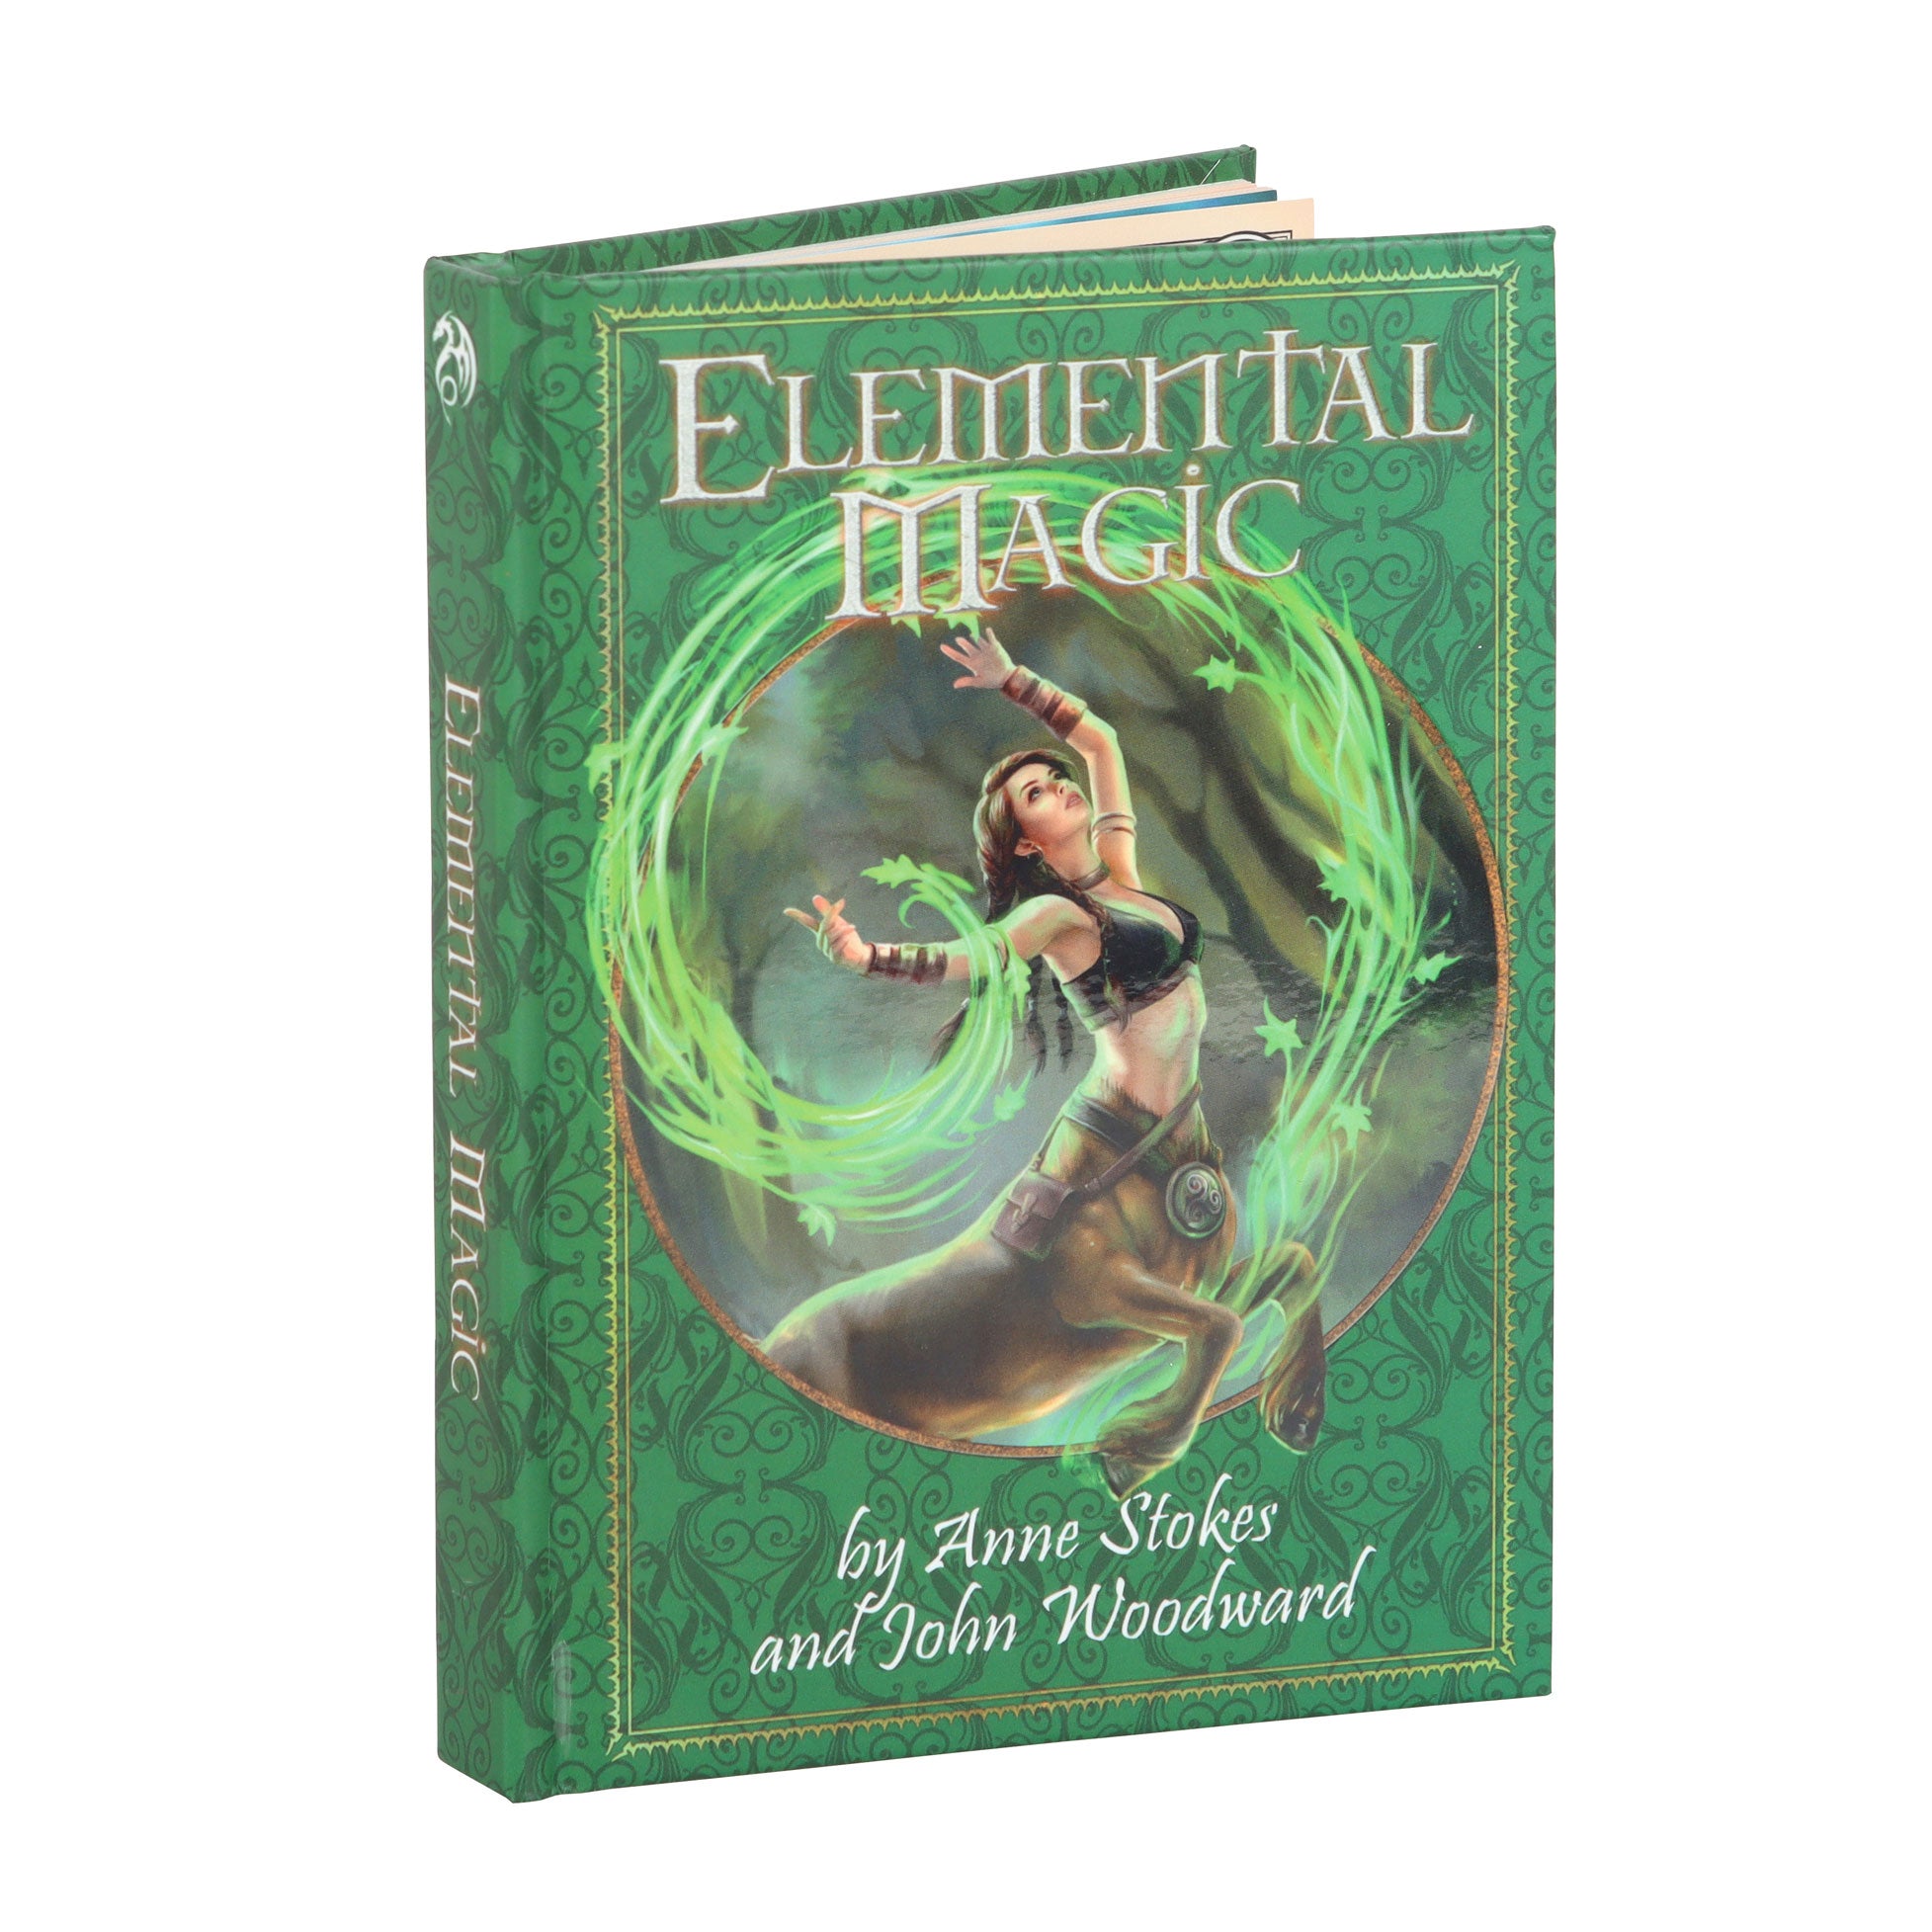 View Elemental Magic Book by Anne Stokes and John Woodward information